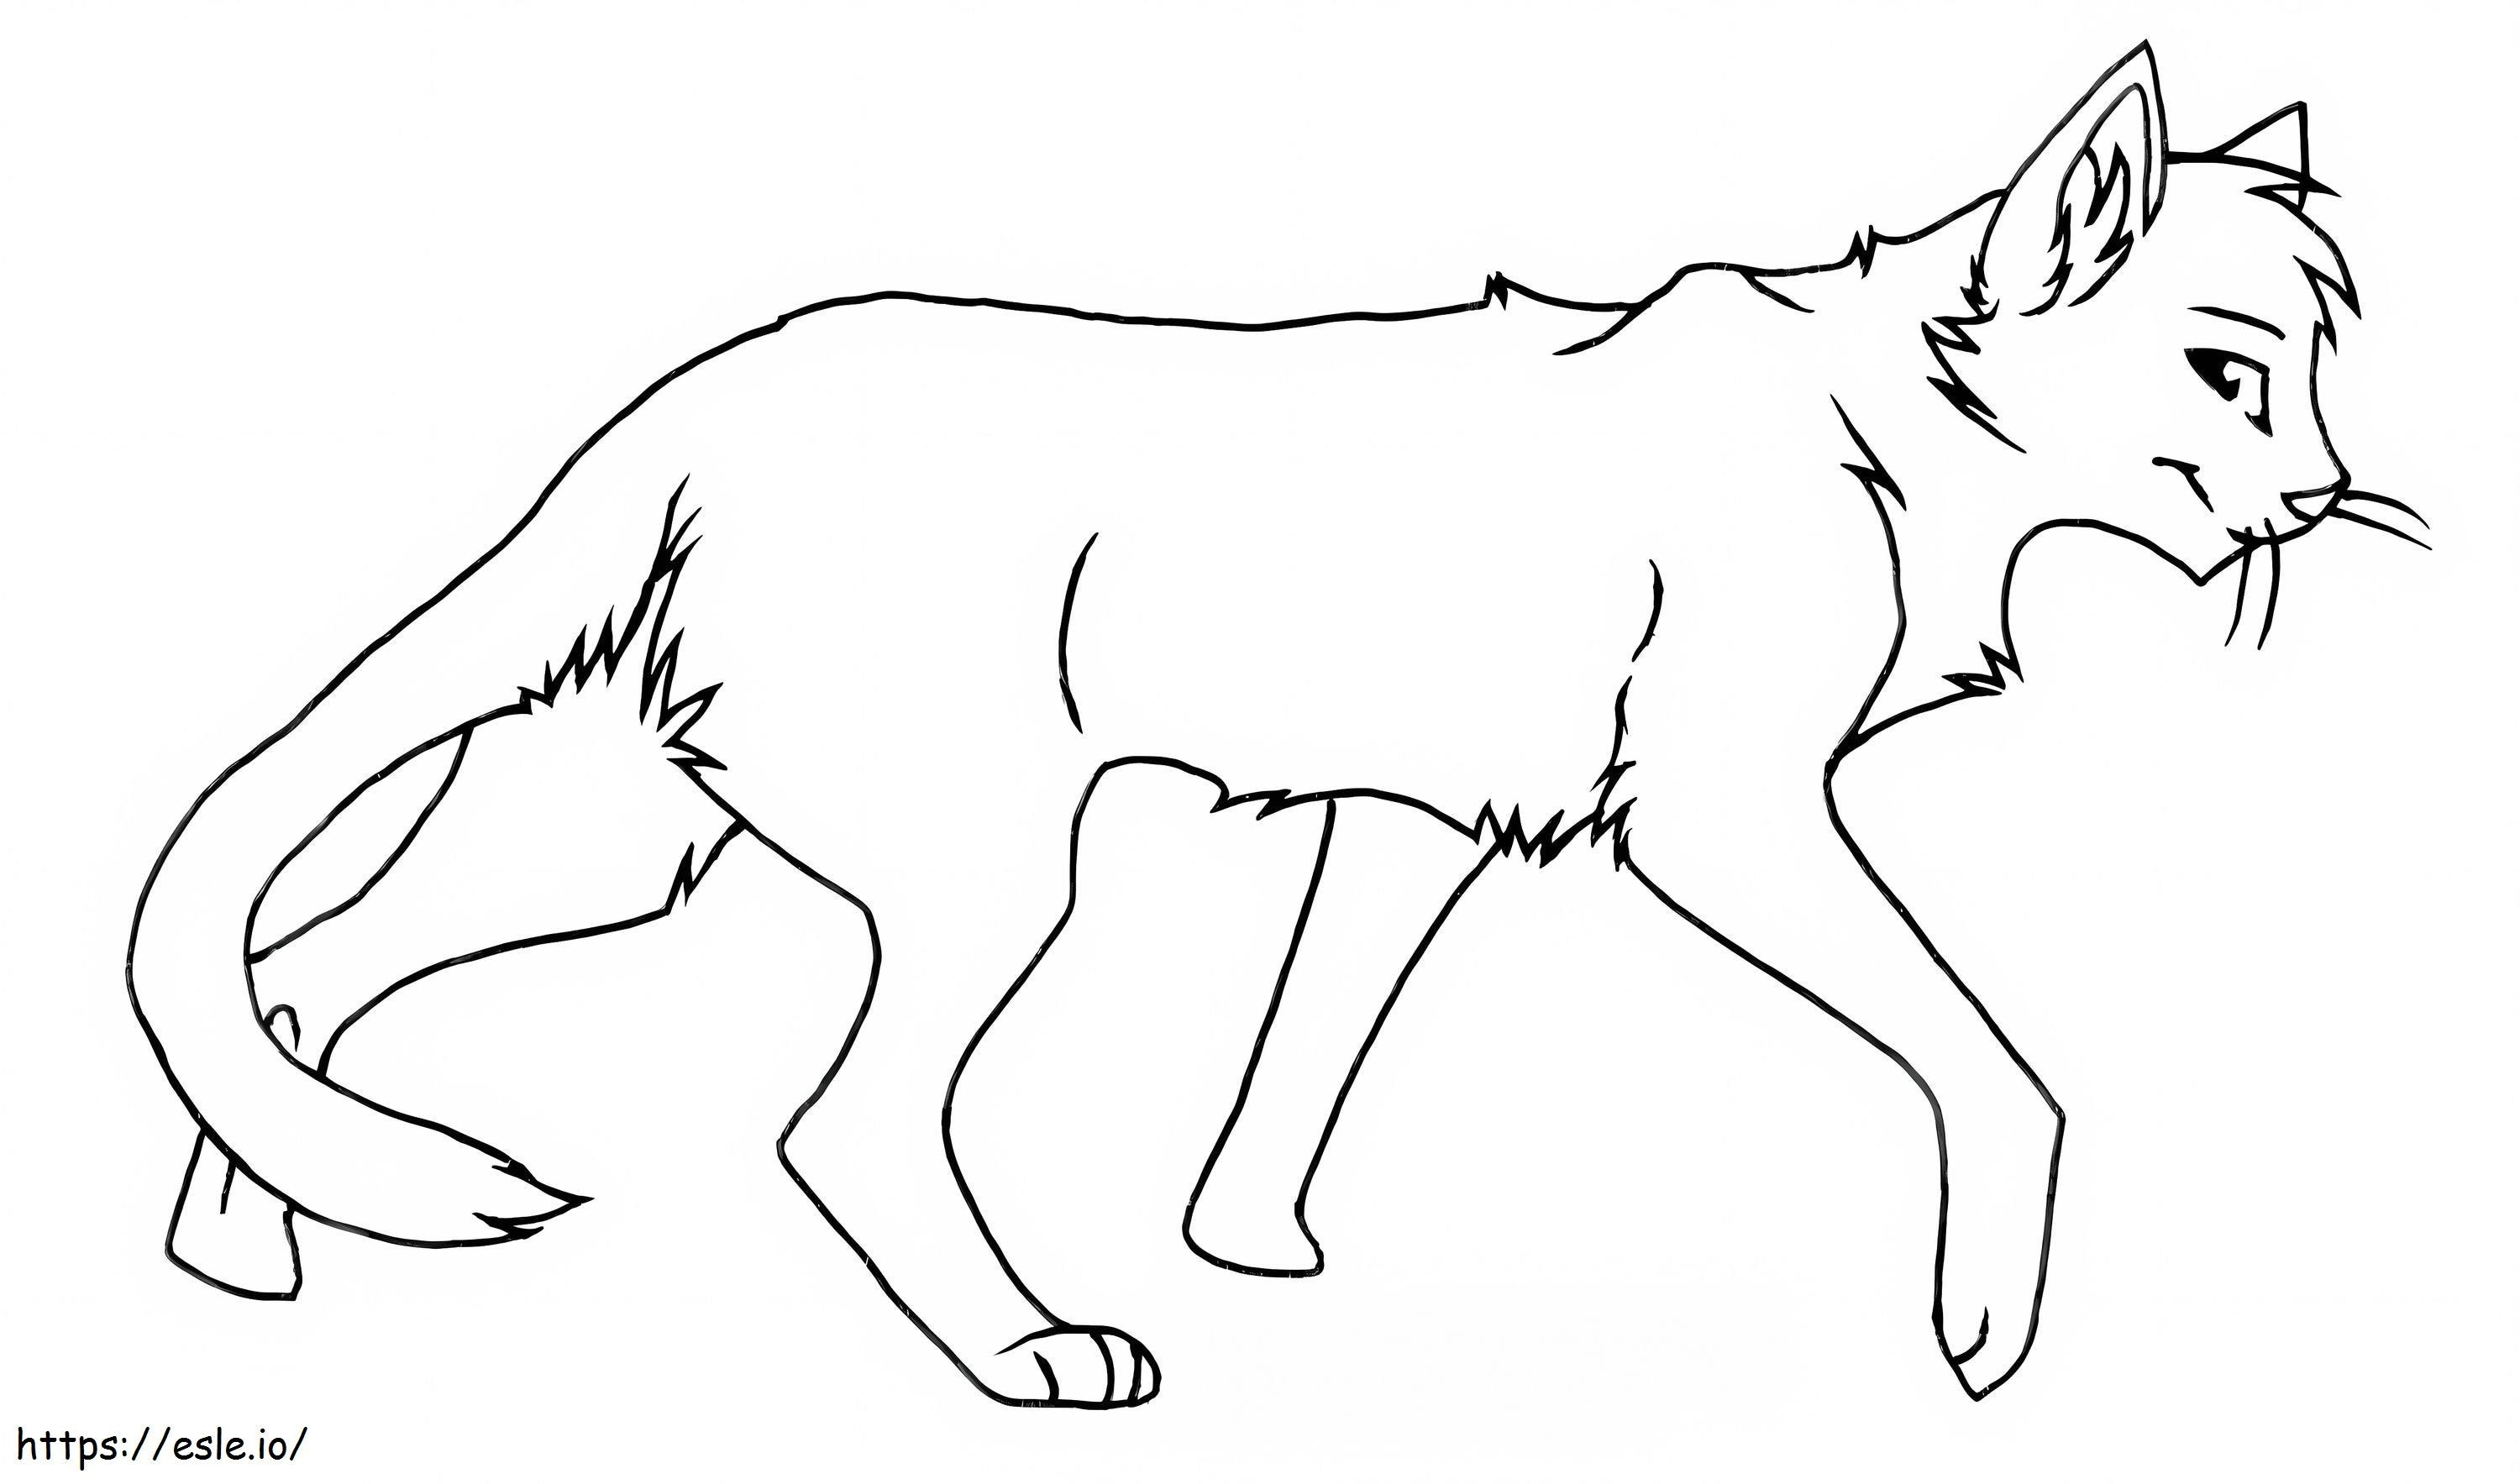 Warrior Cats Walking coloring page